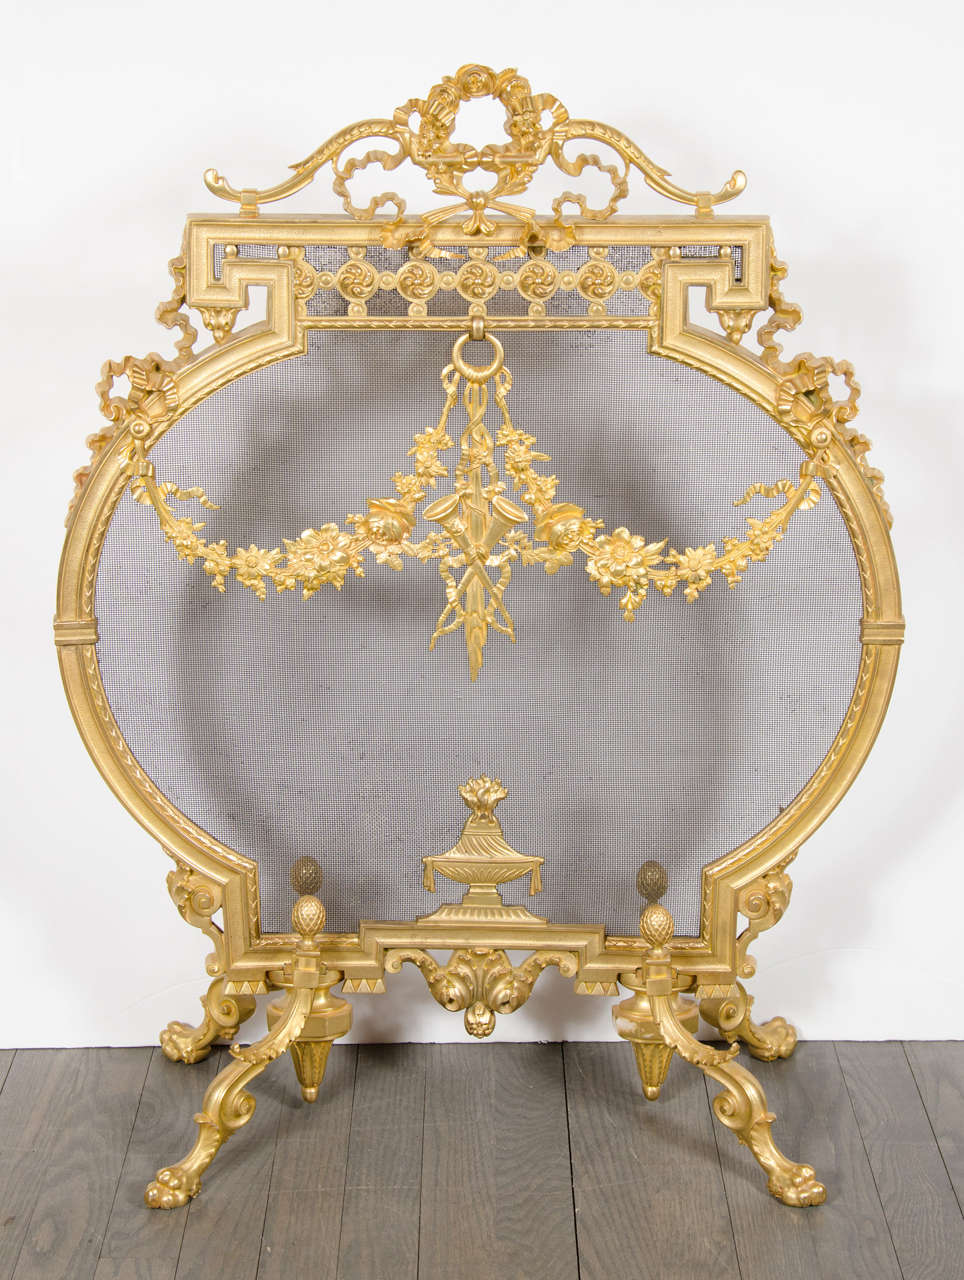 This magnificent fire place cover/screen is made of Dore Bronze and features motifs of garland,wreaths with stylized Greek key detailing .It also has details of a bow,lute and horn all supported by claw feet.This is truly an exquisite piece in